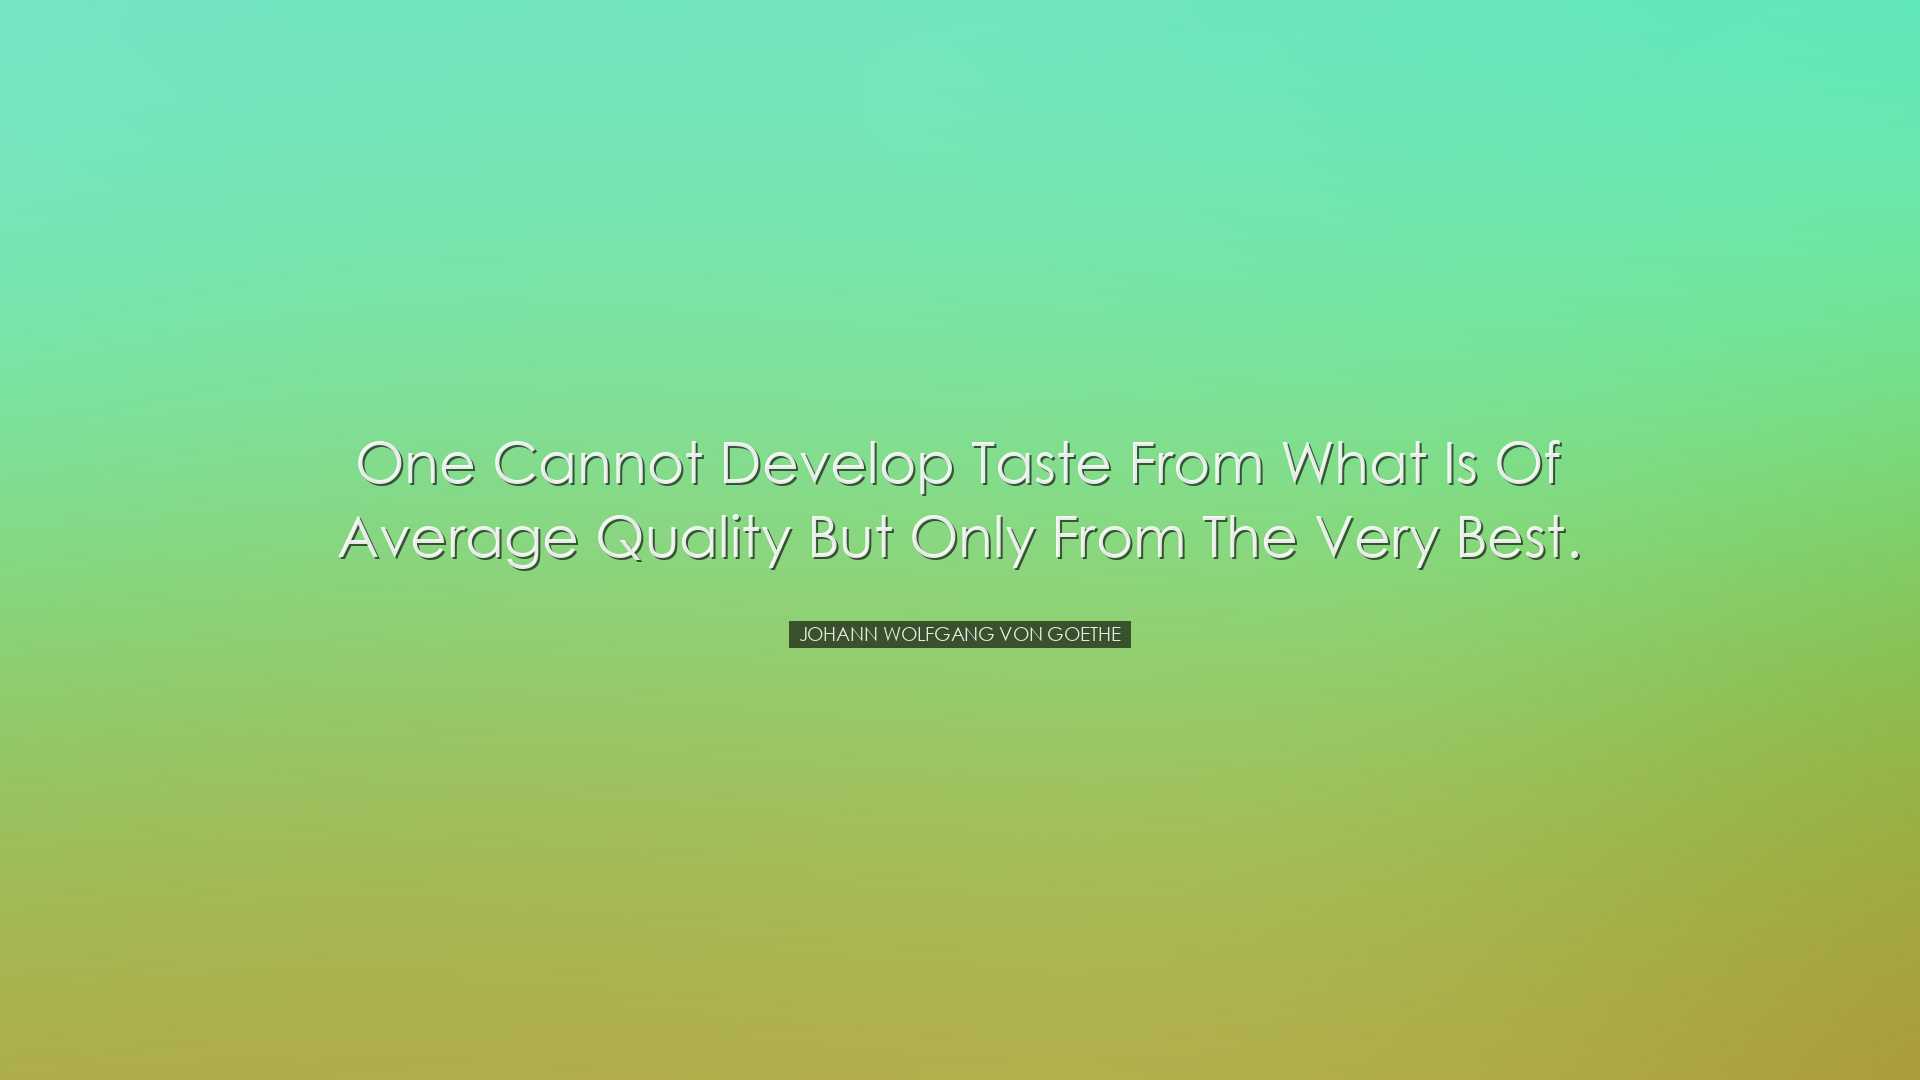 One cannot develop taste from what is of average quality but only